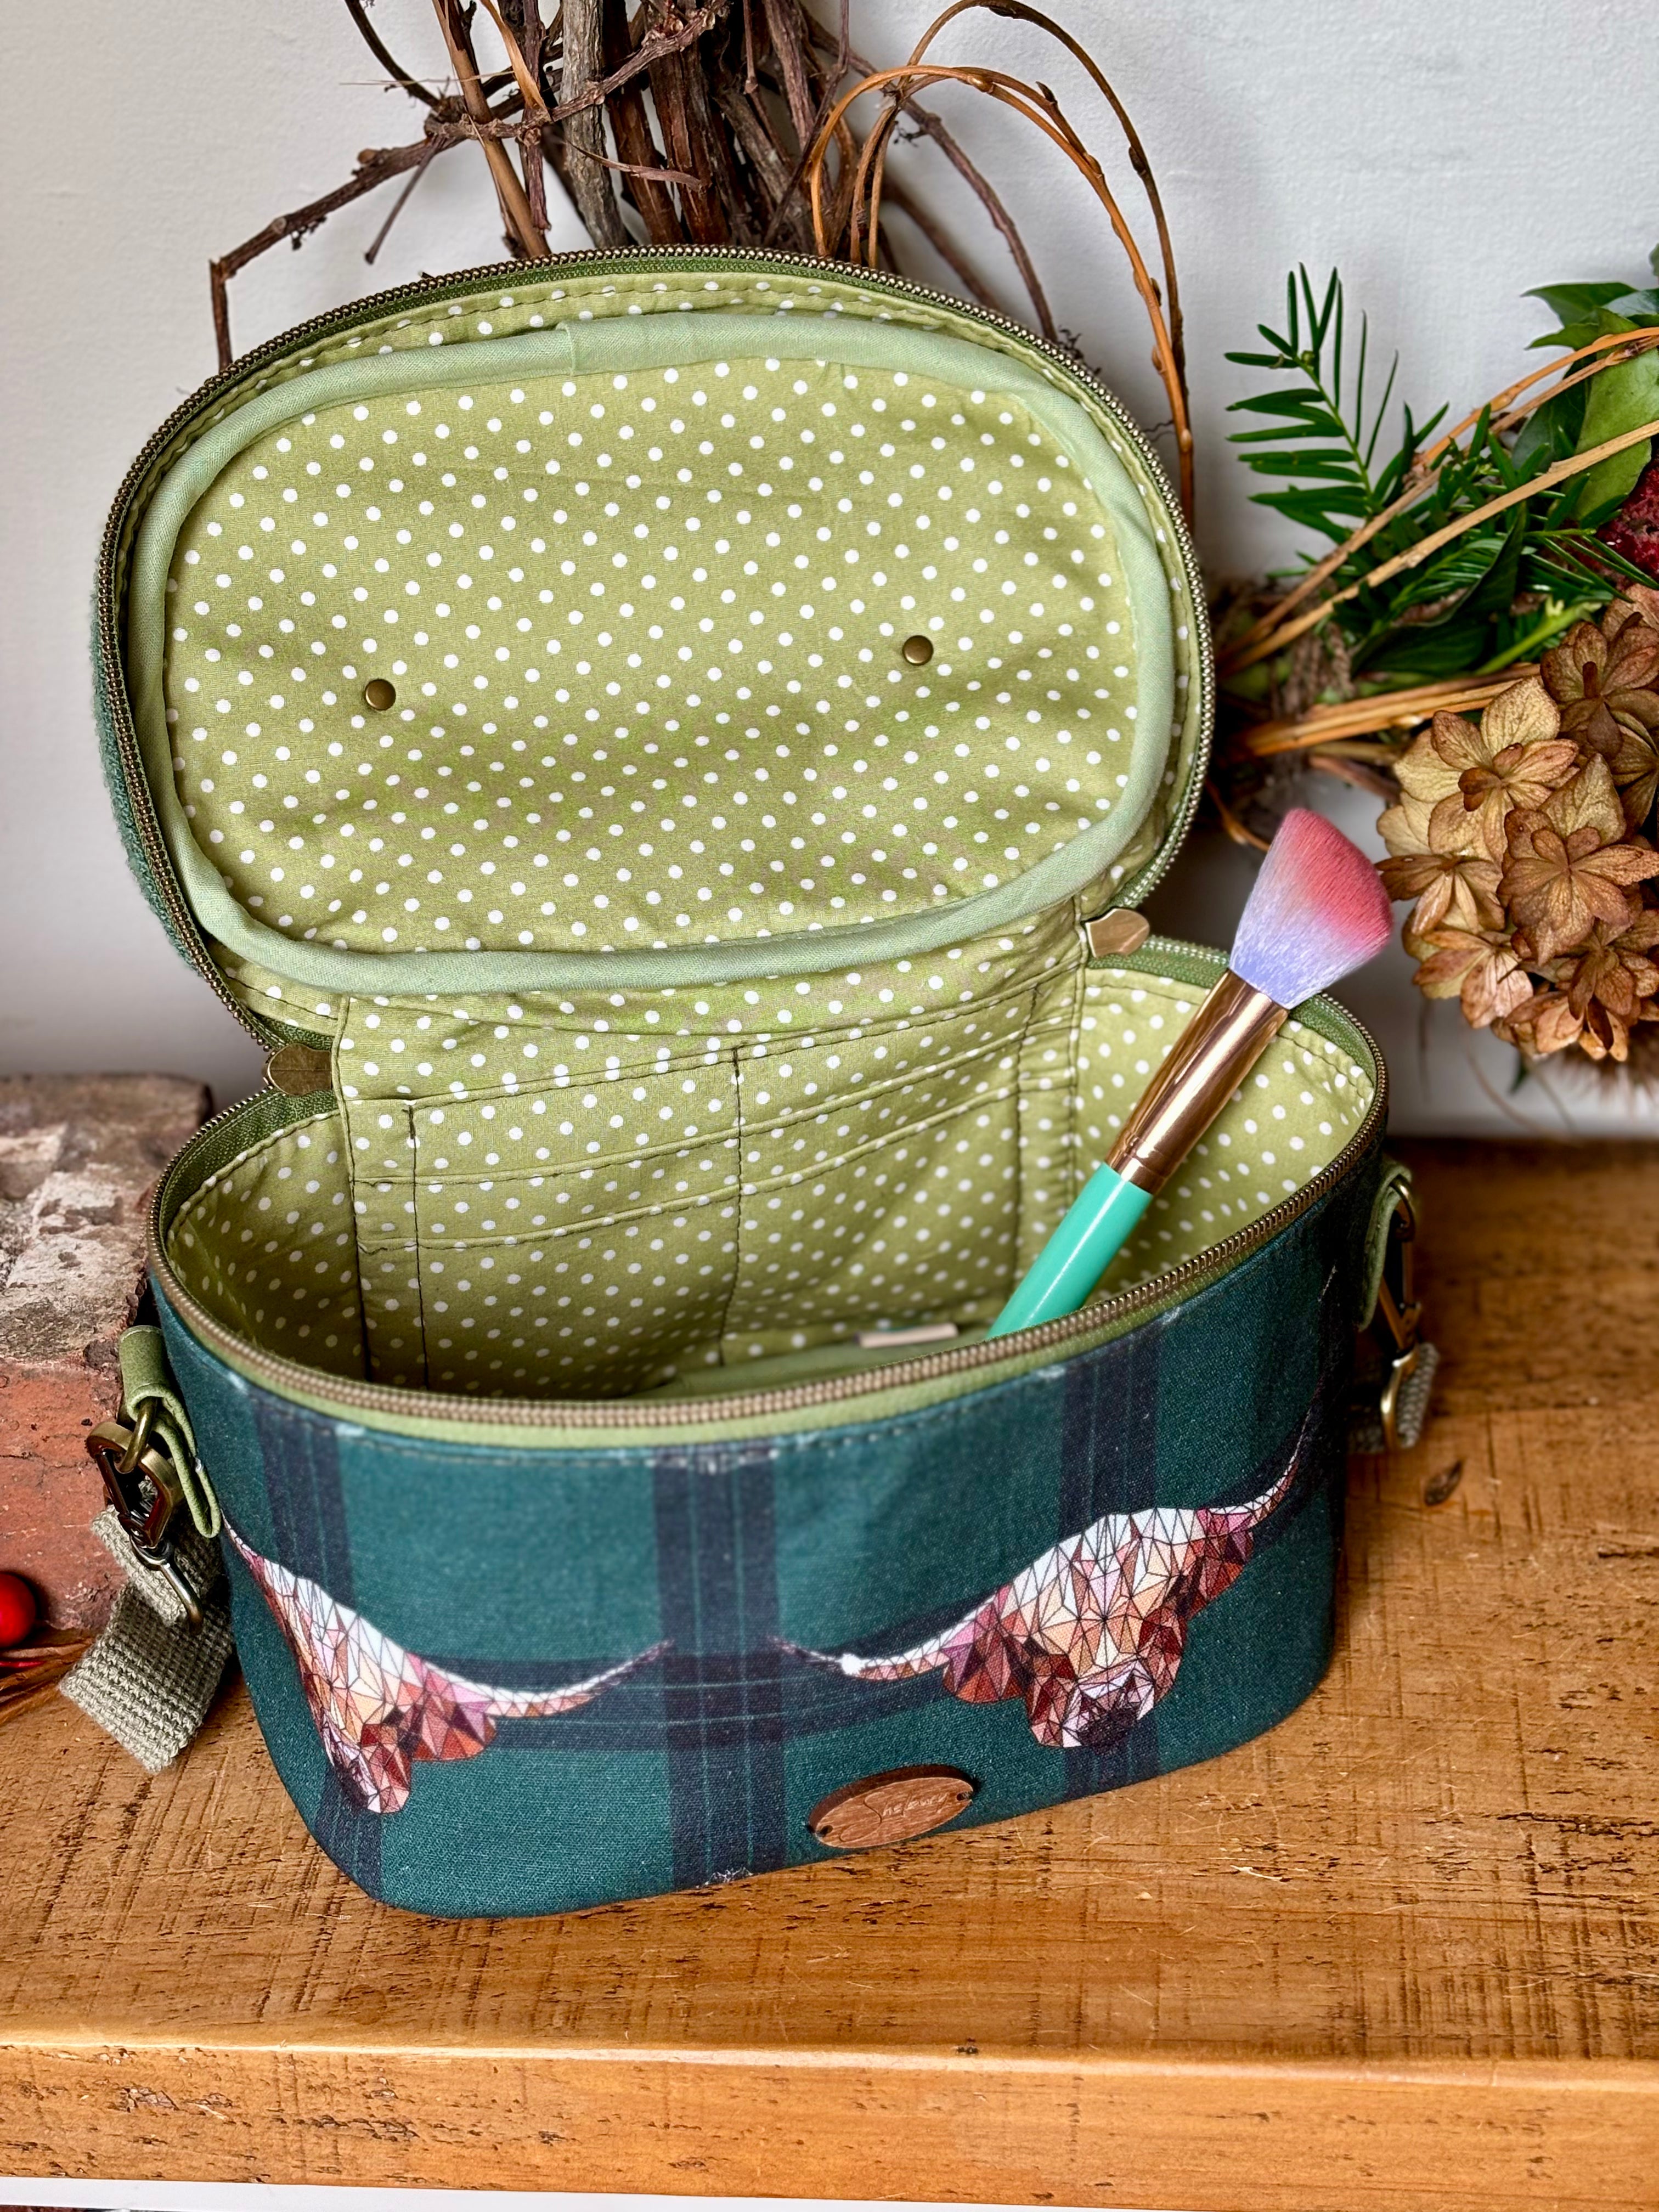 Charming Highland Cows Teresita Train Case, showcasing adorable Highland cattle in a picturesque design in green hues, providing both functionality with a green polka dot lining.